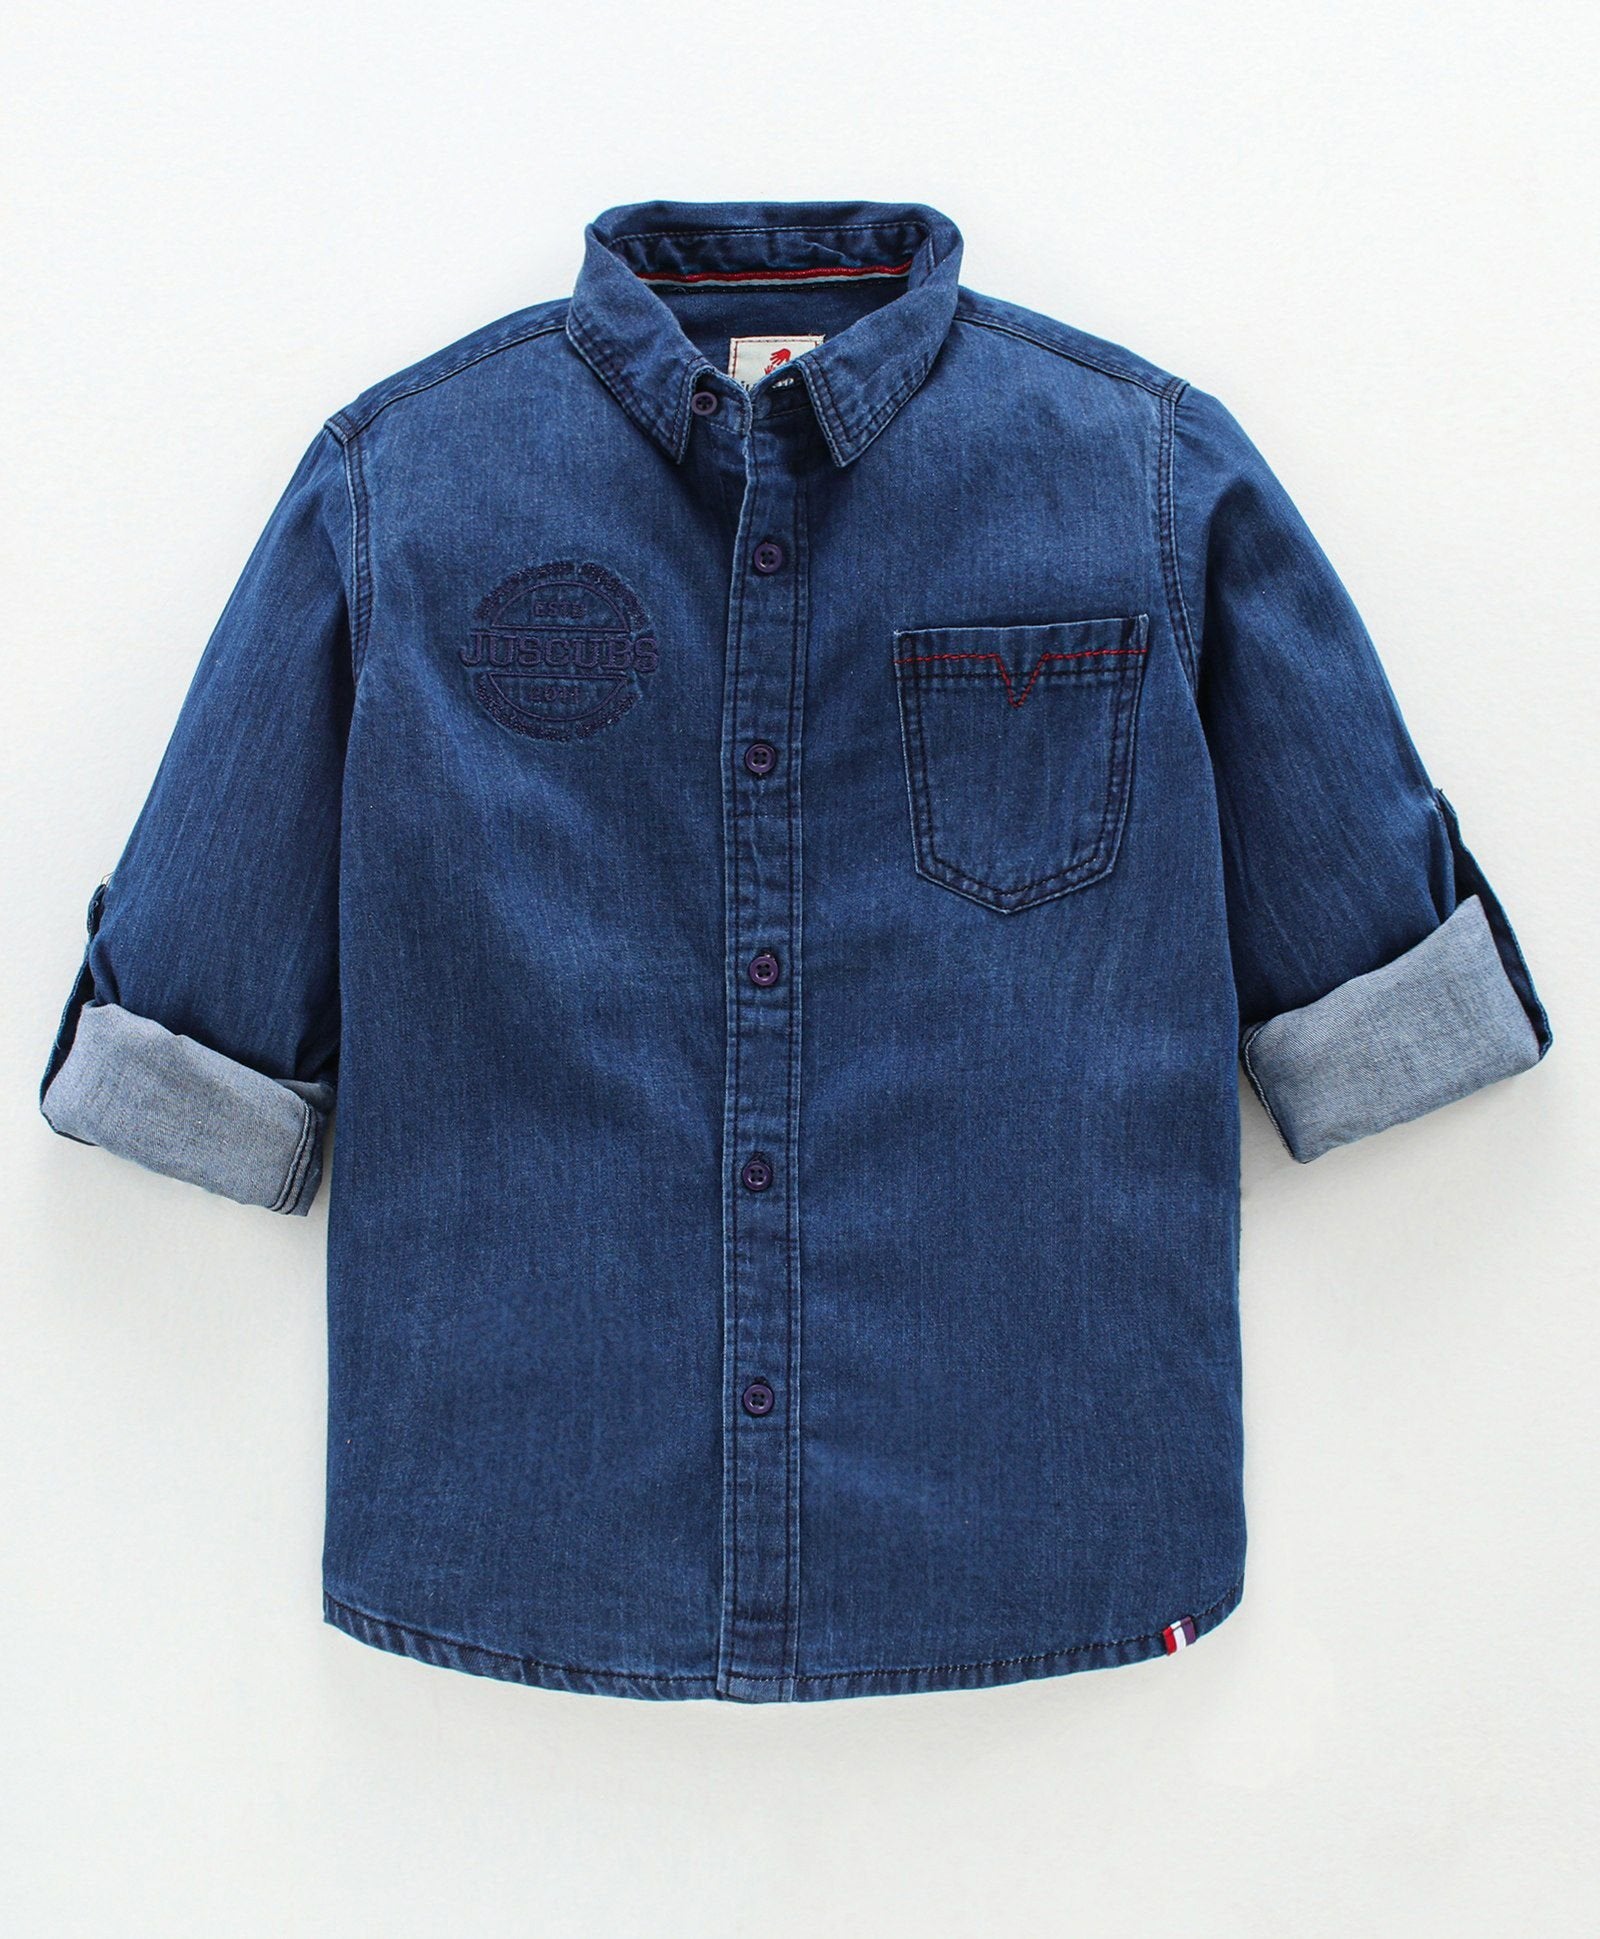 Roll Up Full Sleeve Solid Colour Bio Wash Shirt - Navy Blue